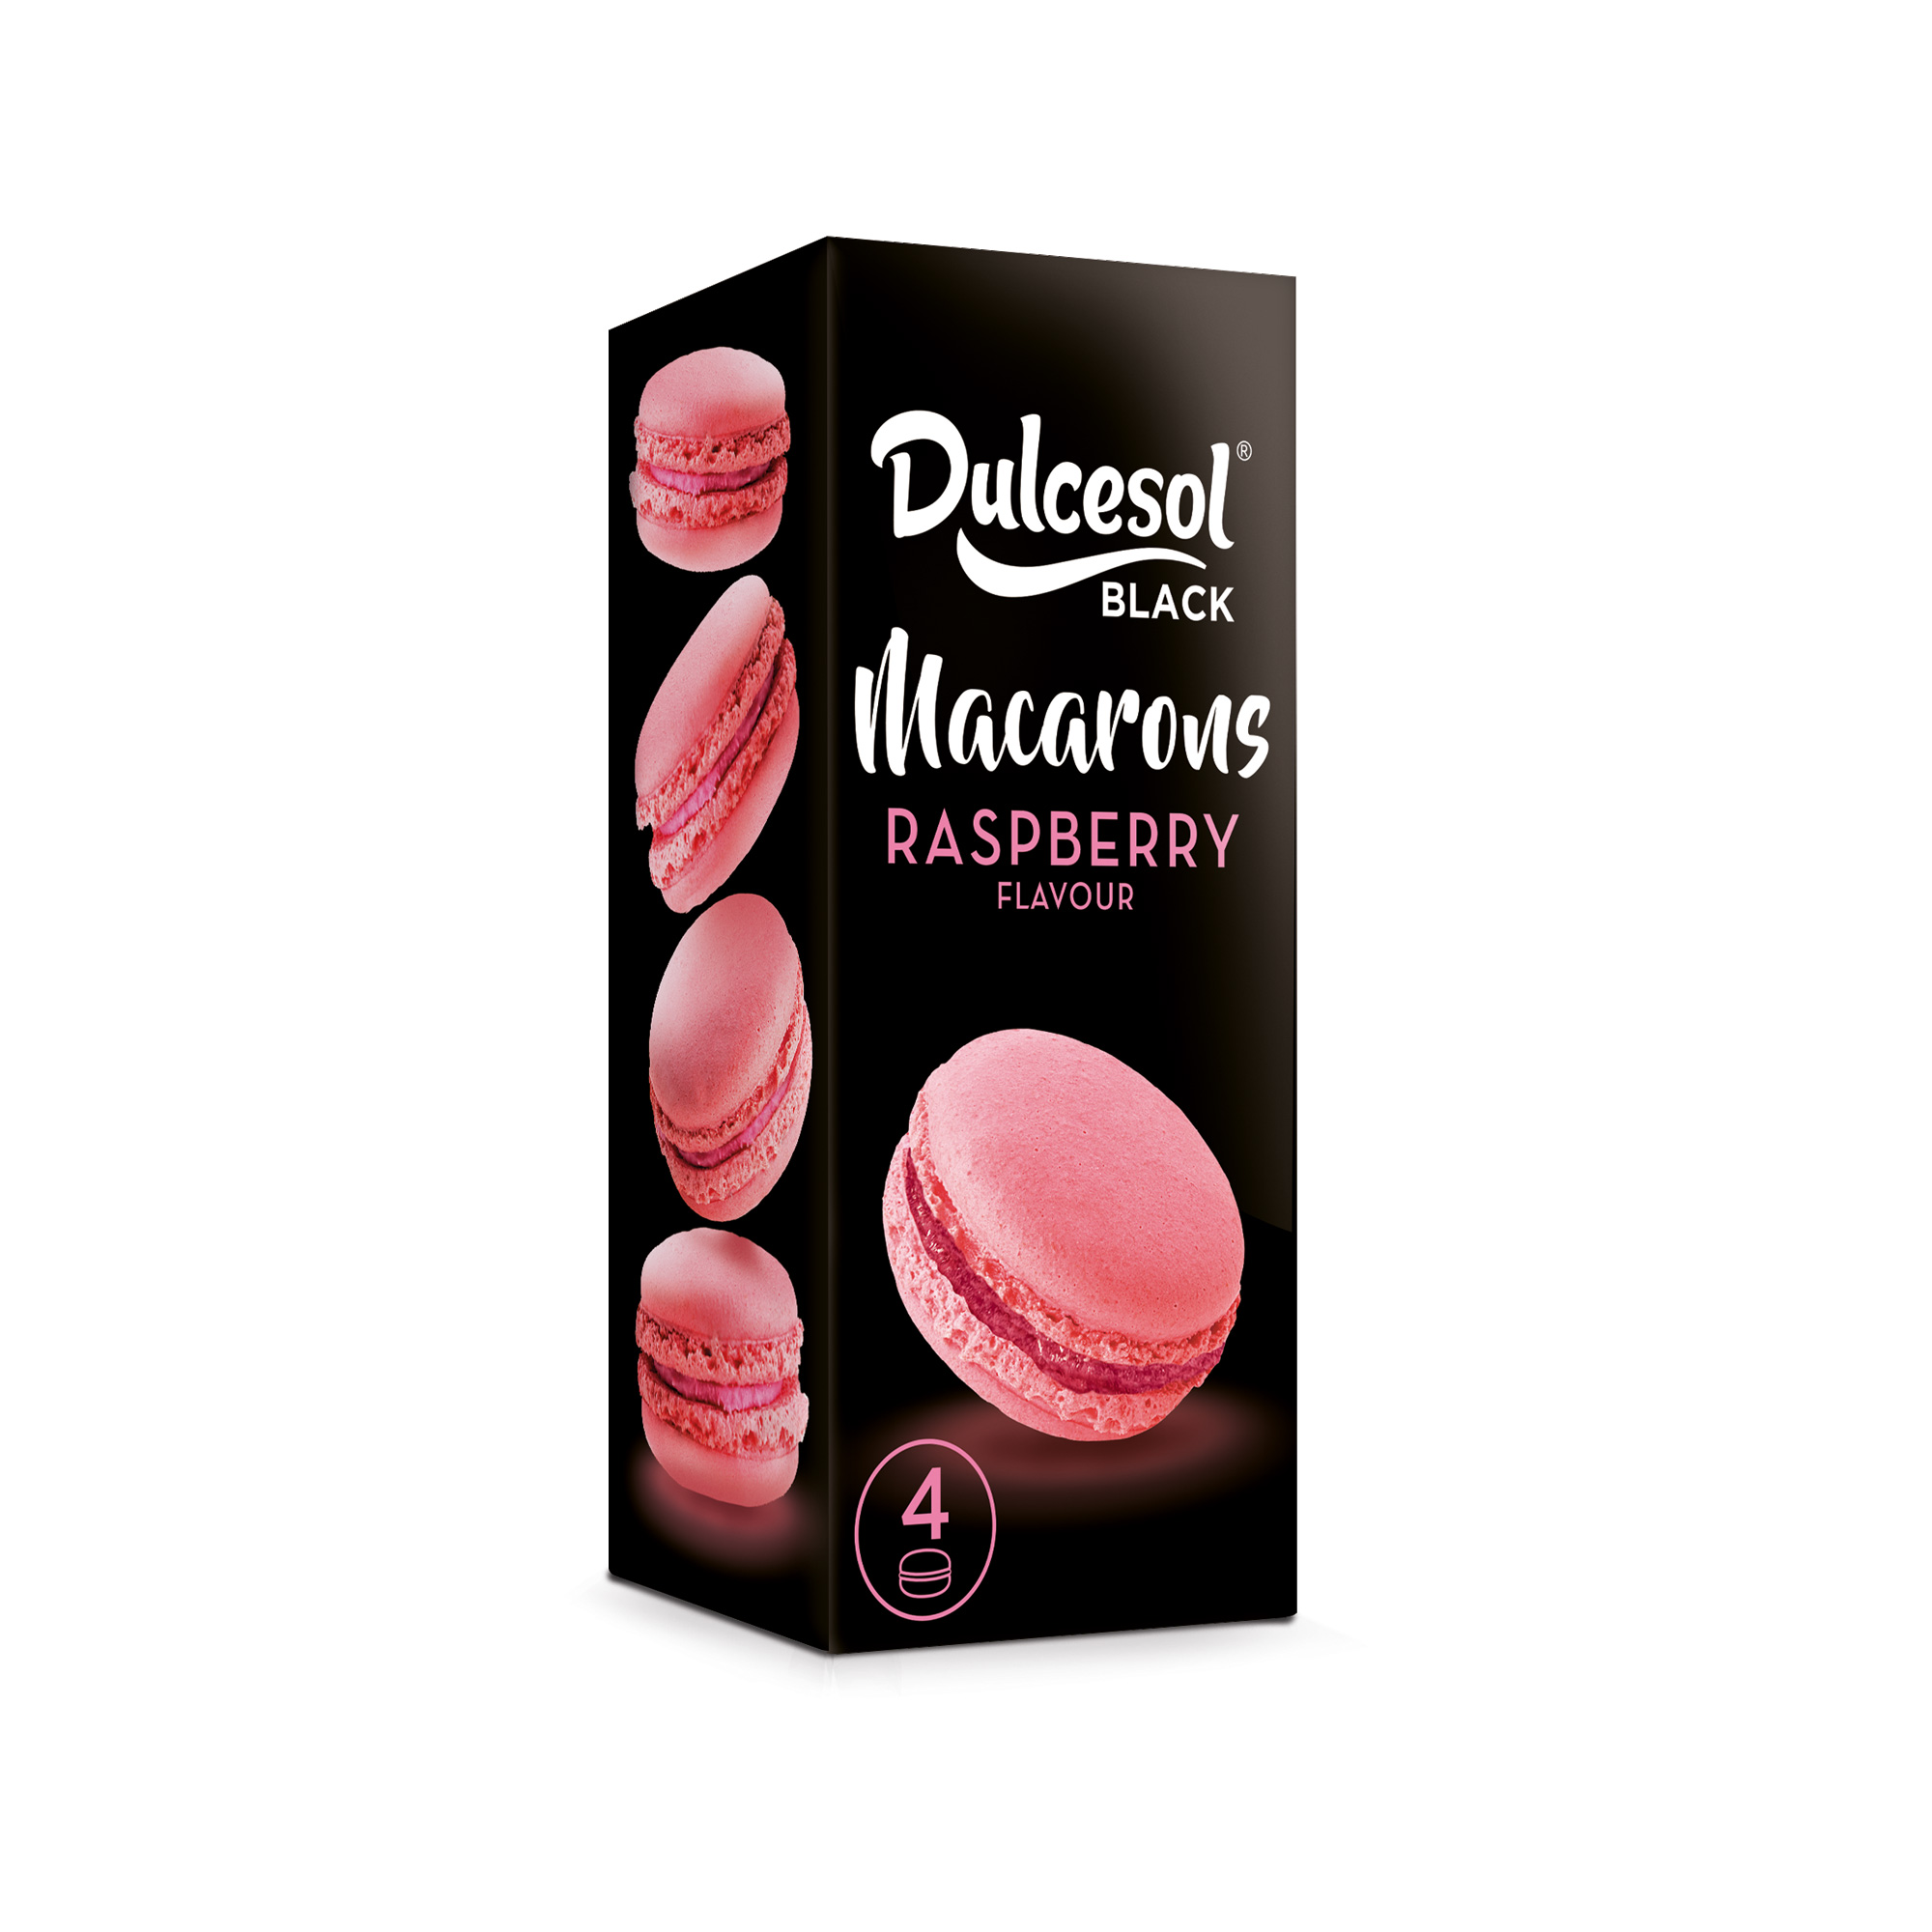 Dulcesol Raspberry flavour Macarons